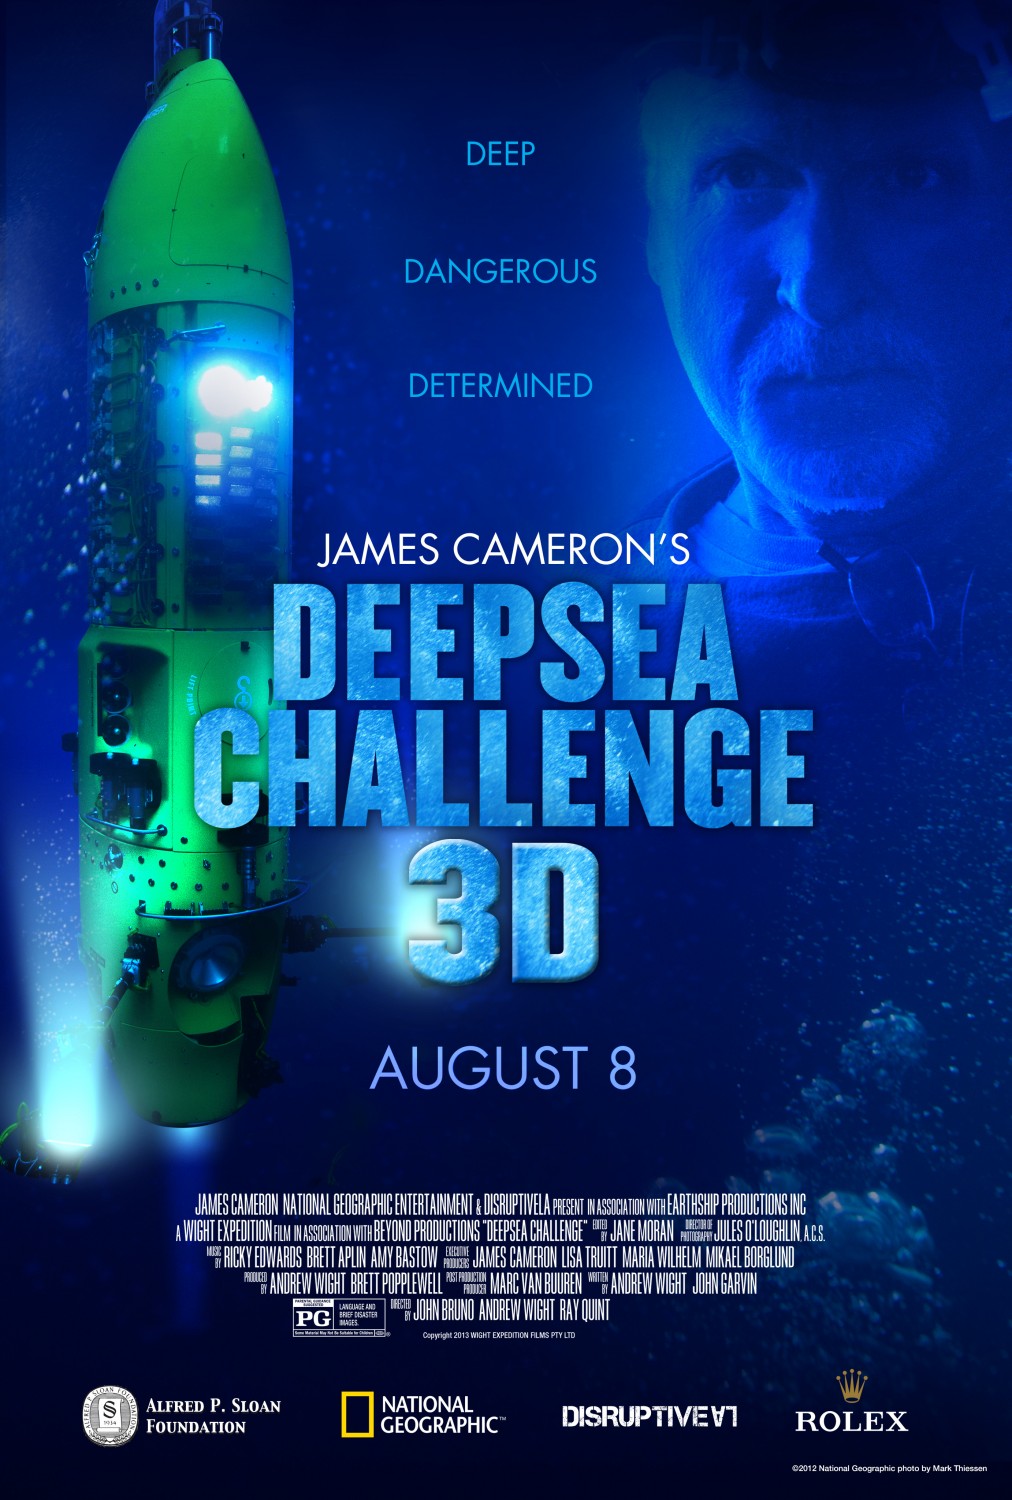 Extra Large Movie Poster Image for James Cameron's Deepsea Challenge 3D 